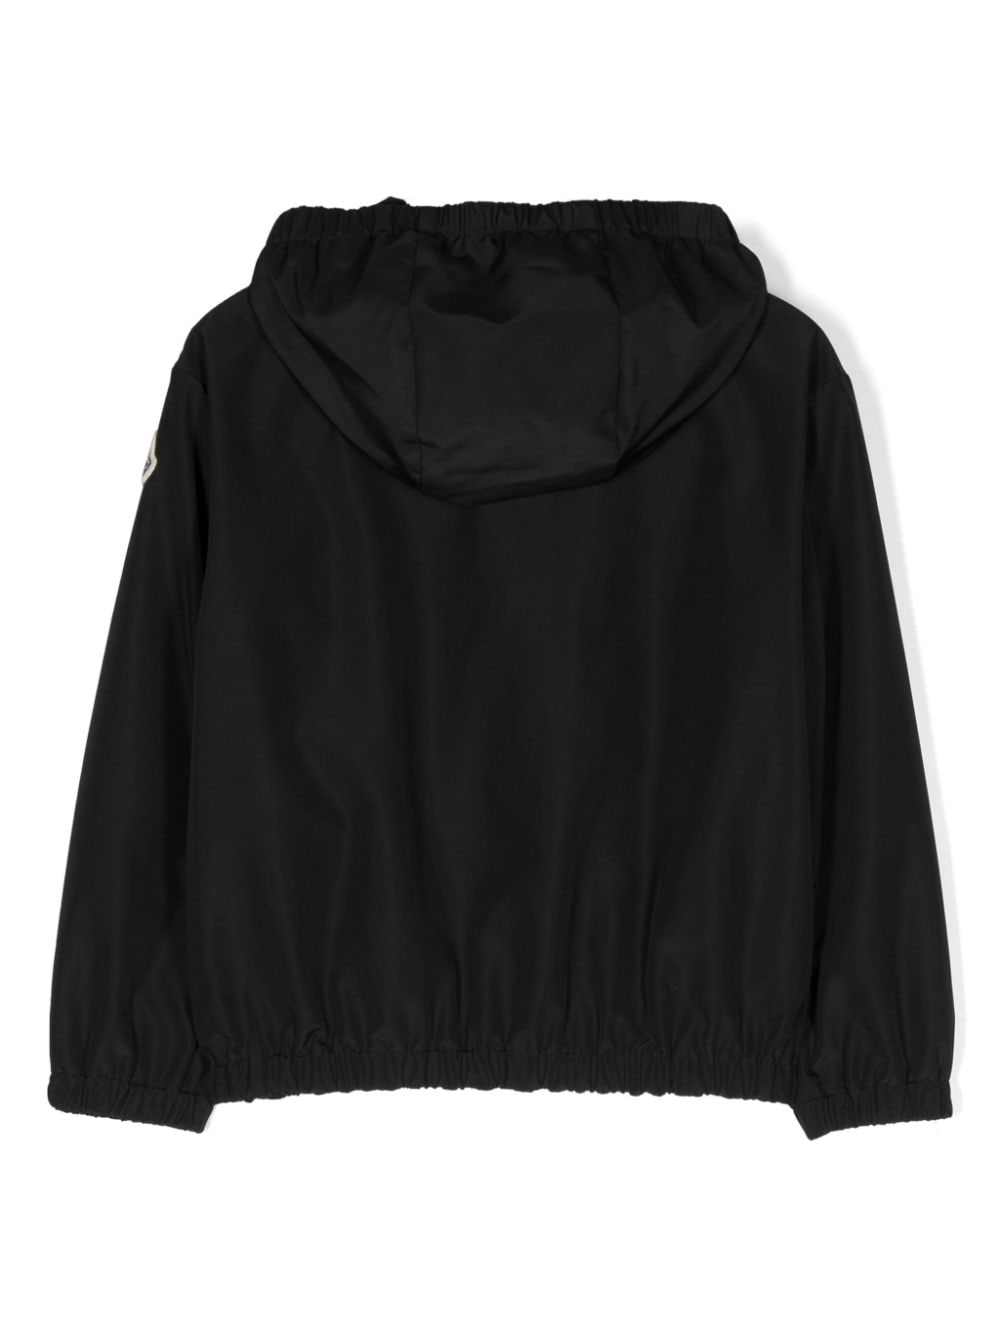 Black Adanna jacket for girls with crystals